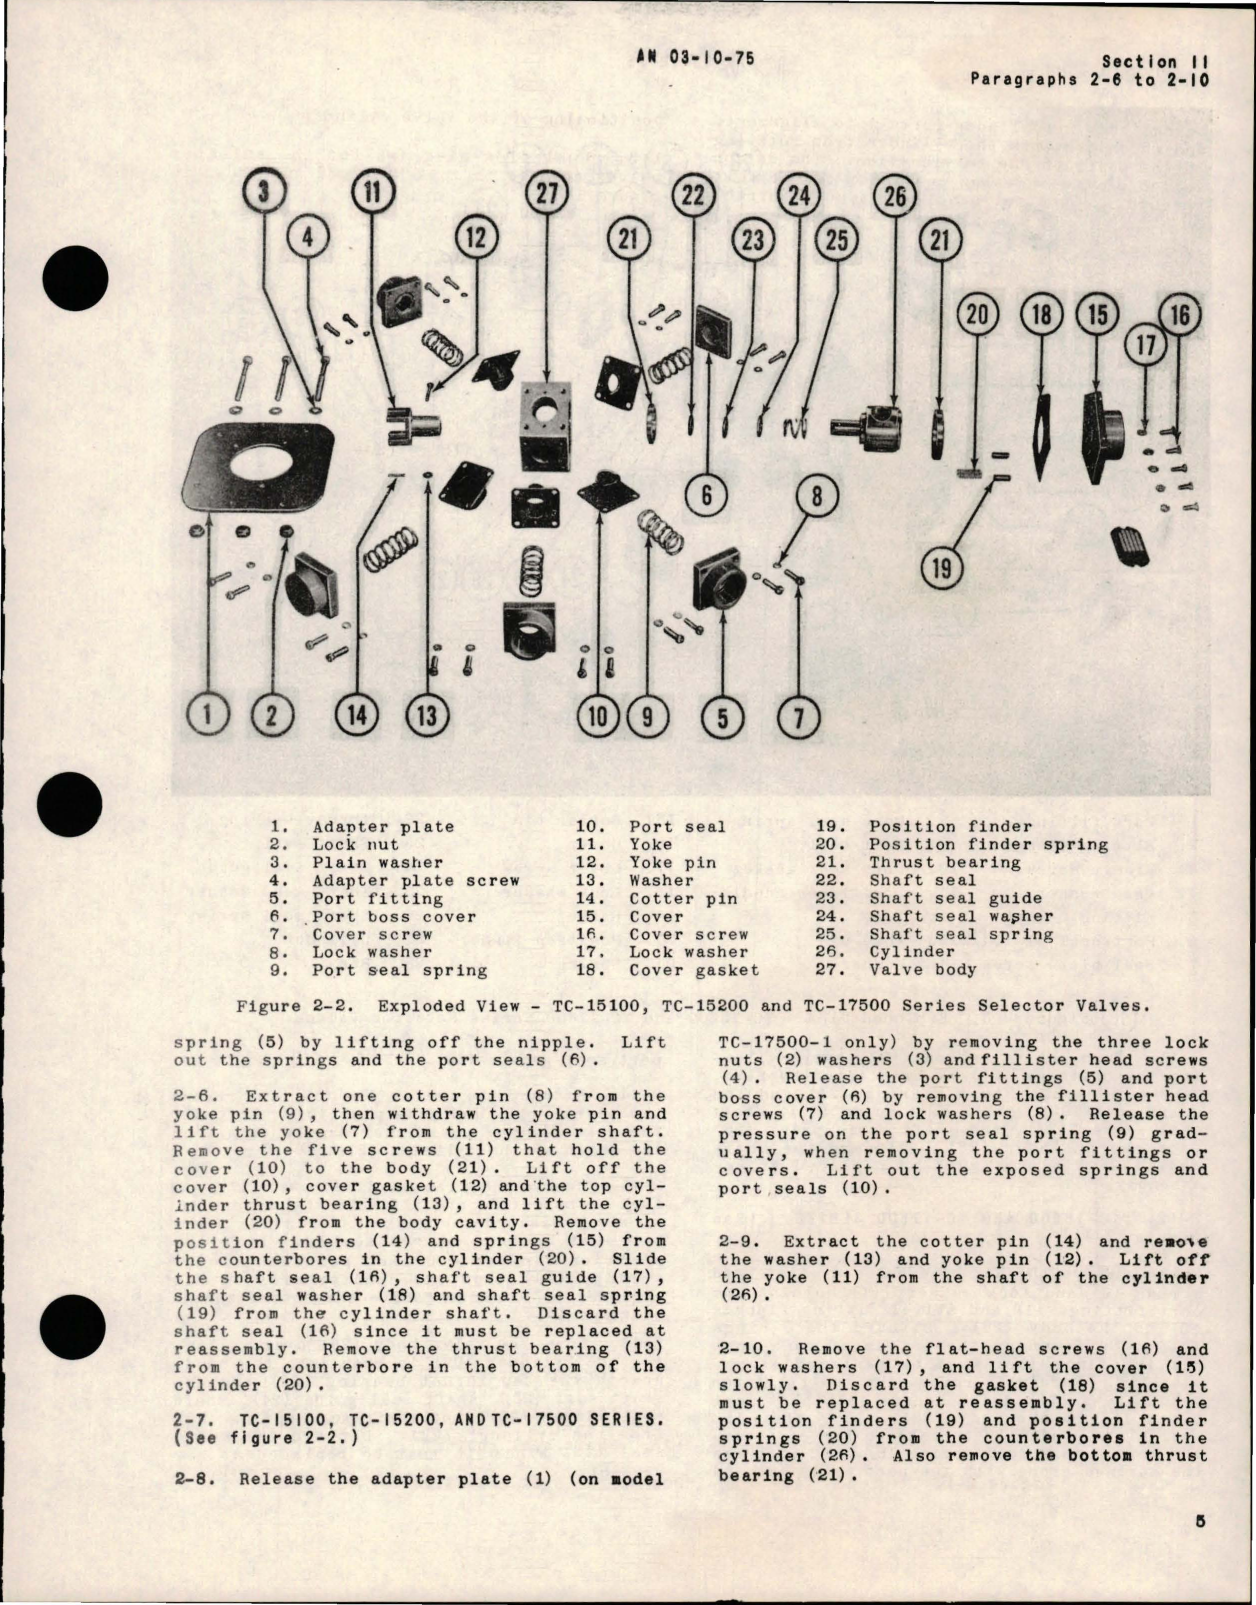 Sample page 7 from AirCorps Library document: Overhaul Instructions for Selector Cocks 